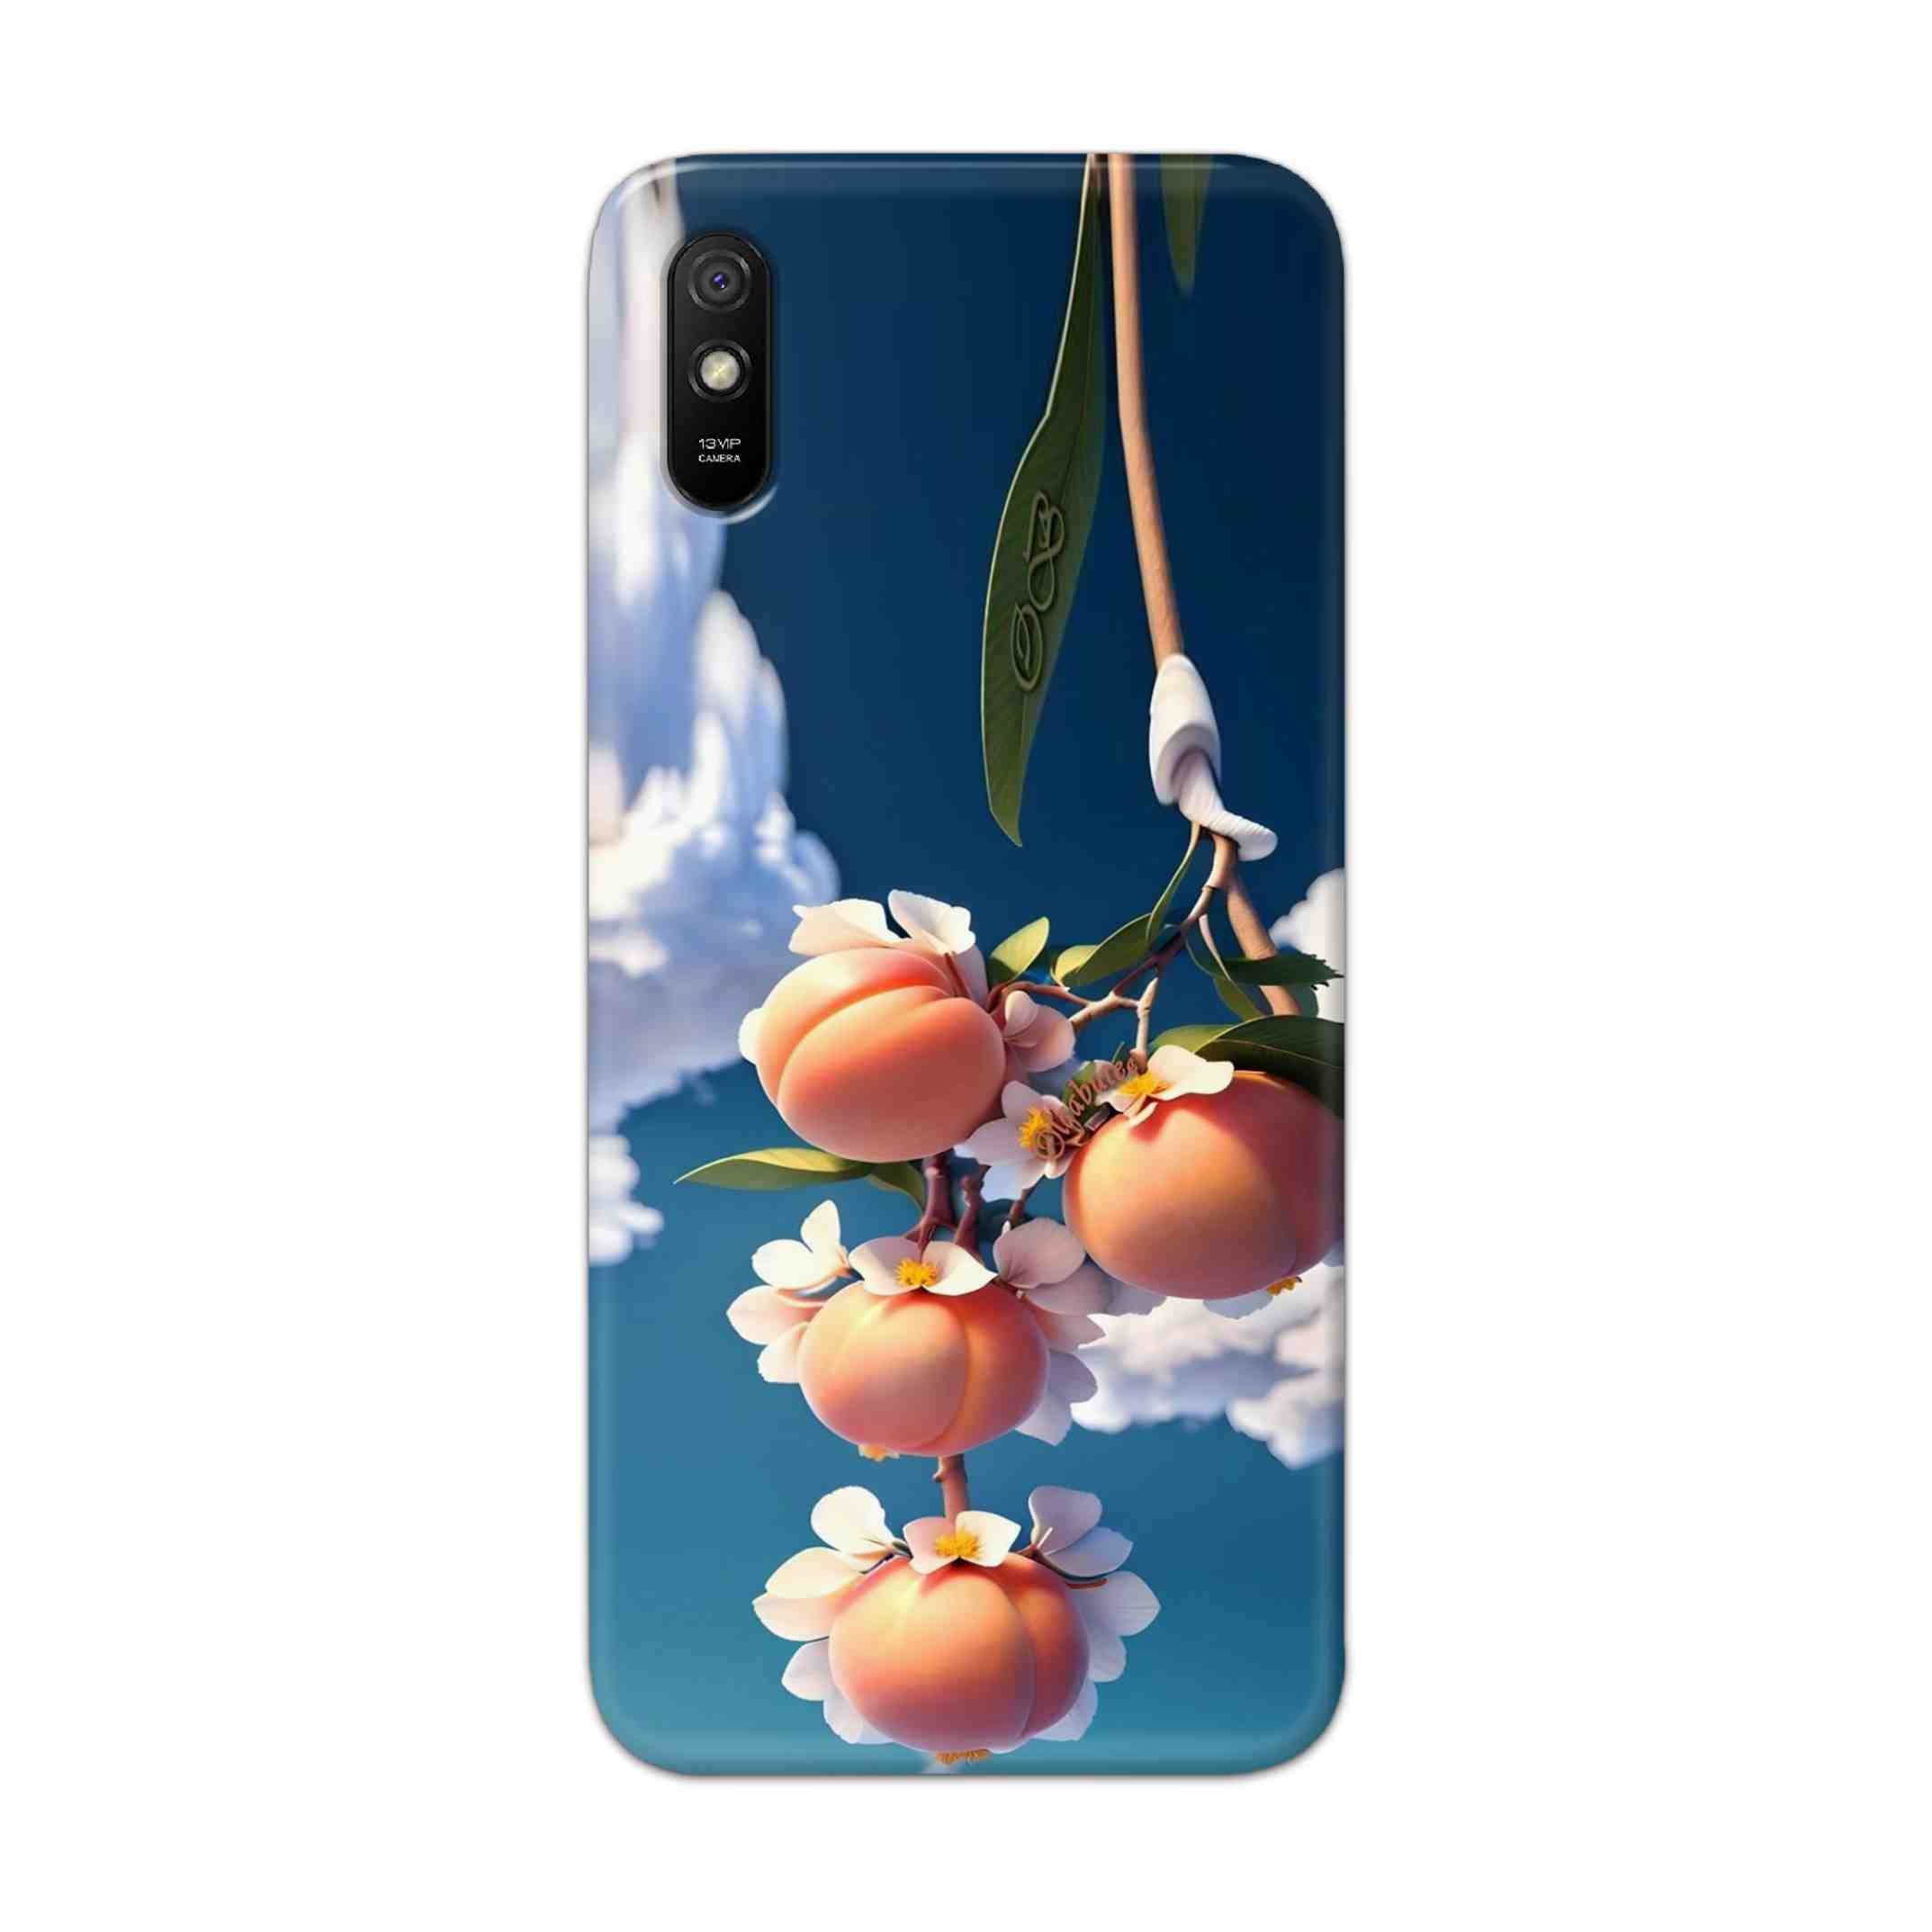 Buy Fruit Hard Back Mobile Phone Case Cover For Redmi 9A Online